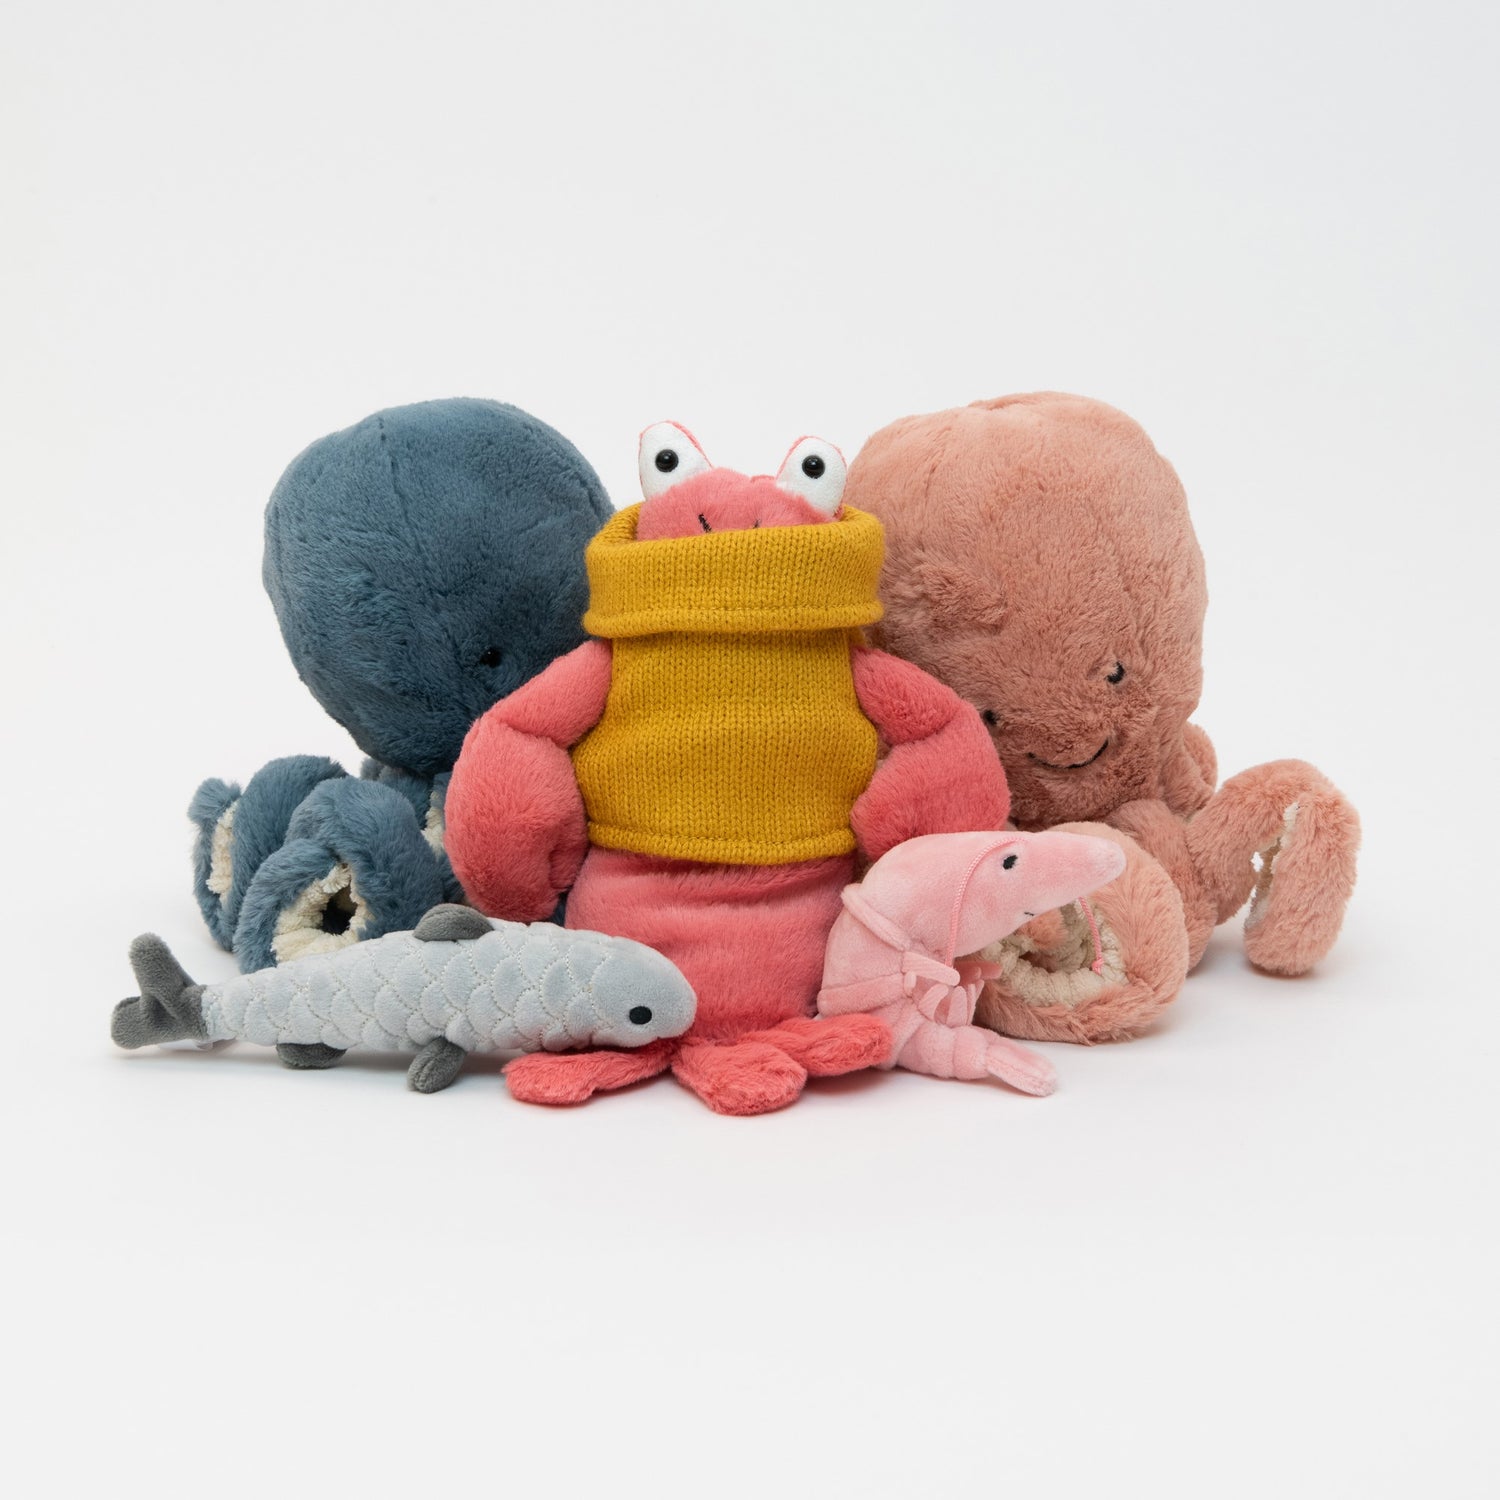 A collection of Jellycat plush soft toys pictured on a white background. There's a lobster, shrimp, sardine, and two octopuses. 